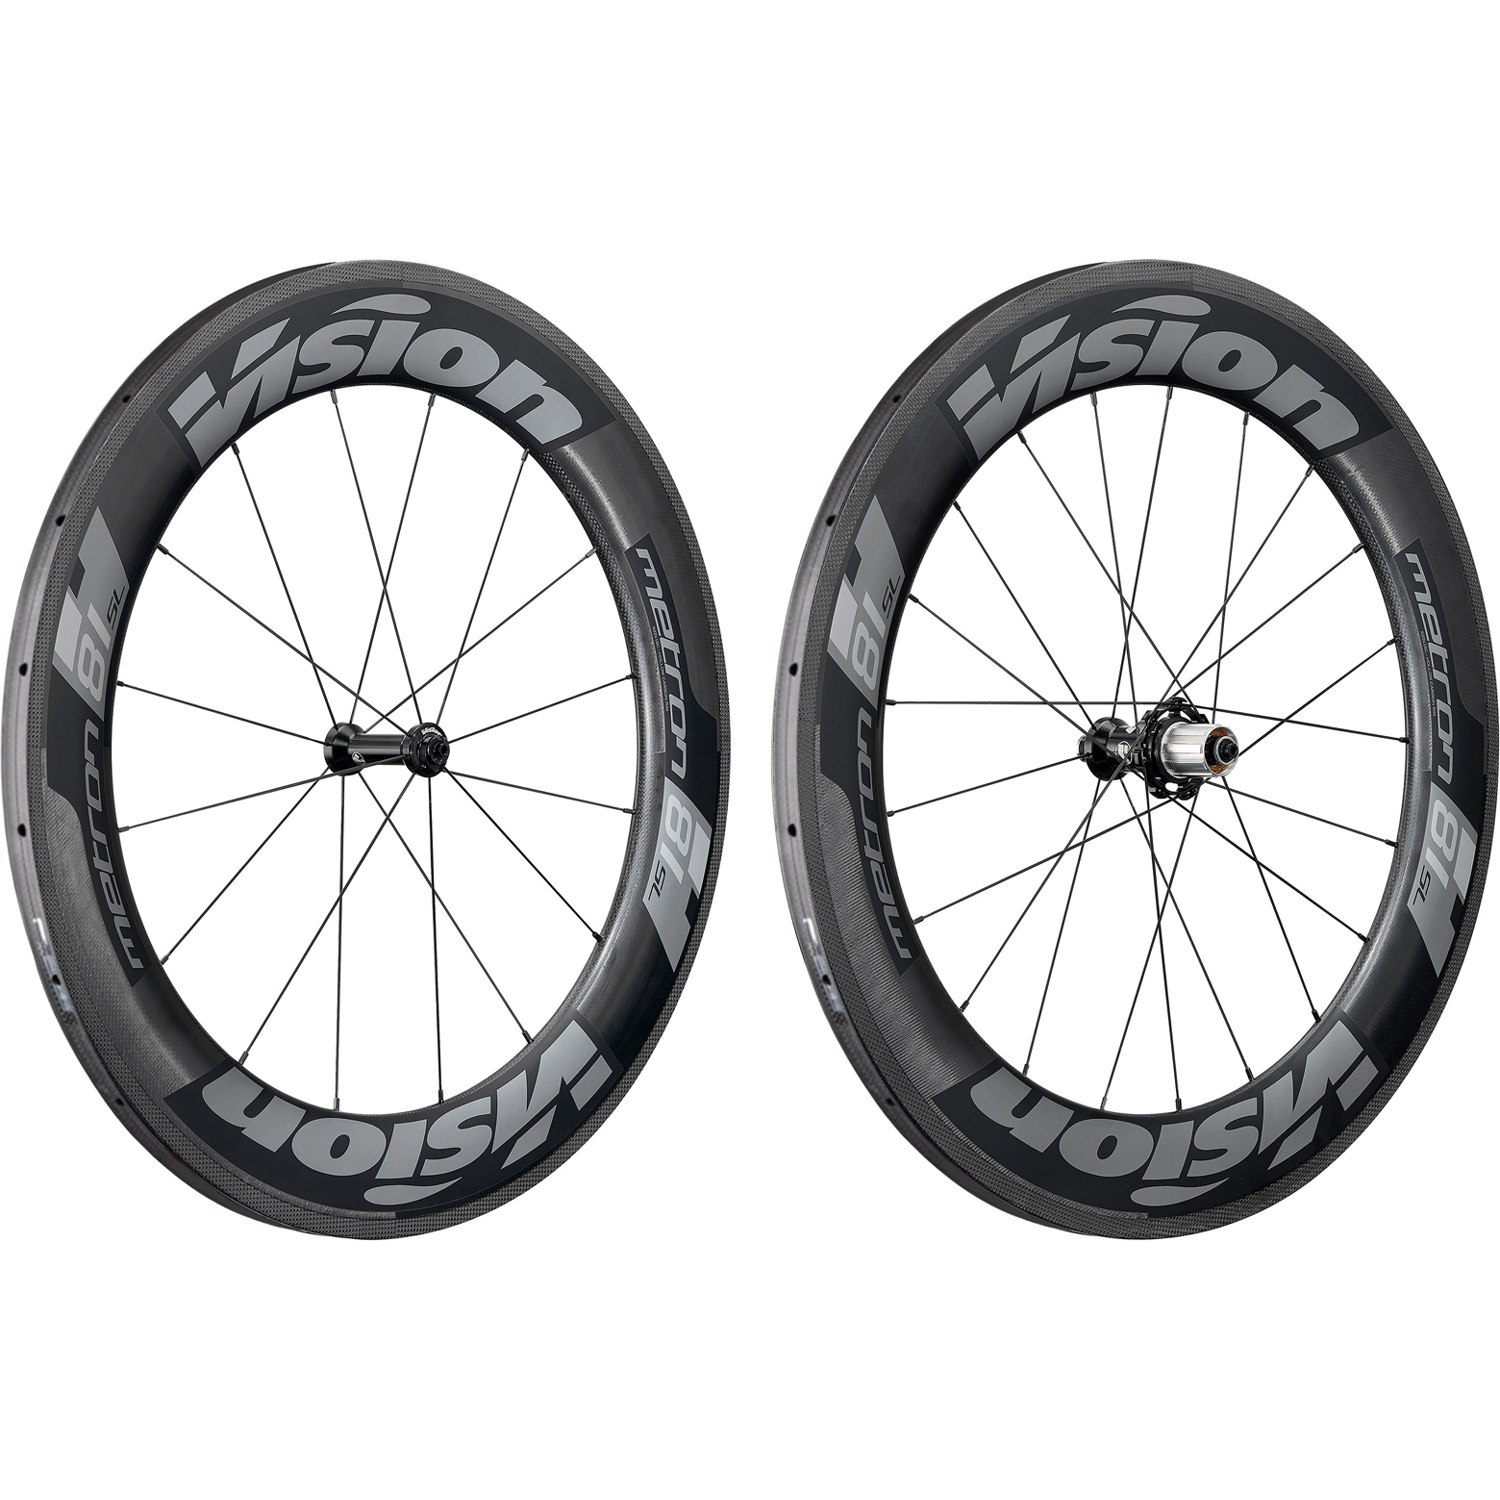 Picture of Vision Metron 81 SL Carbon Wheelset - Tubular - SRAM XDR